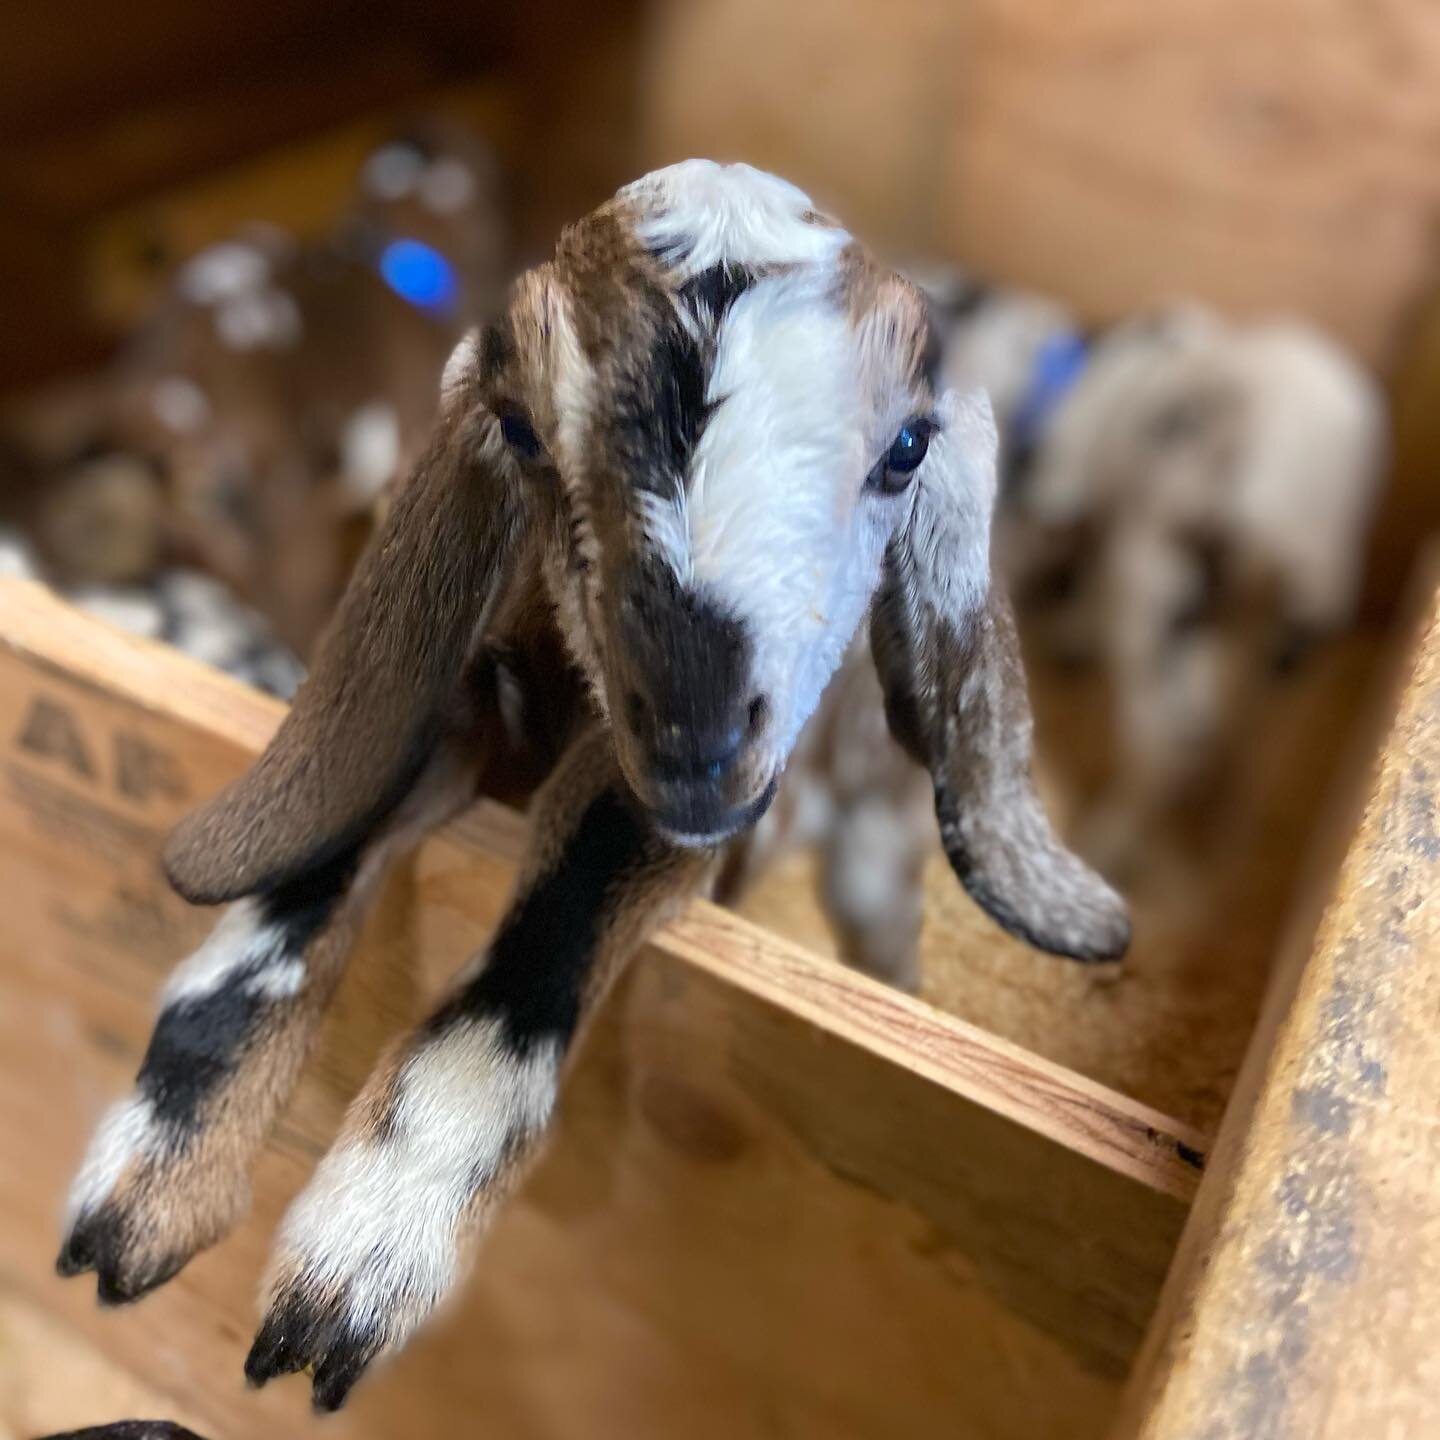 The announcement you&rsquo;ve all been waiting for!  Babies are here! ❤️😍❤️

IMPORTANT- Please read!!
We understand there is a great deal of excitement around meeting the baby goats so we are requesting the following: 
Please check in with one of us